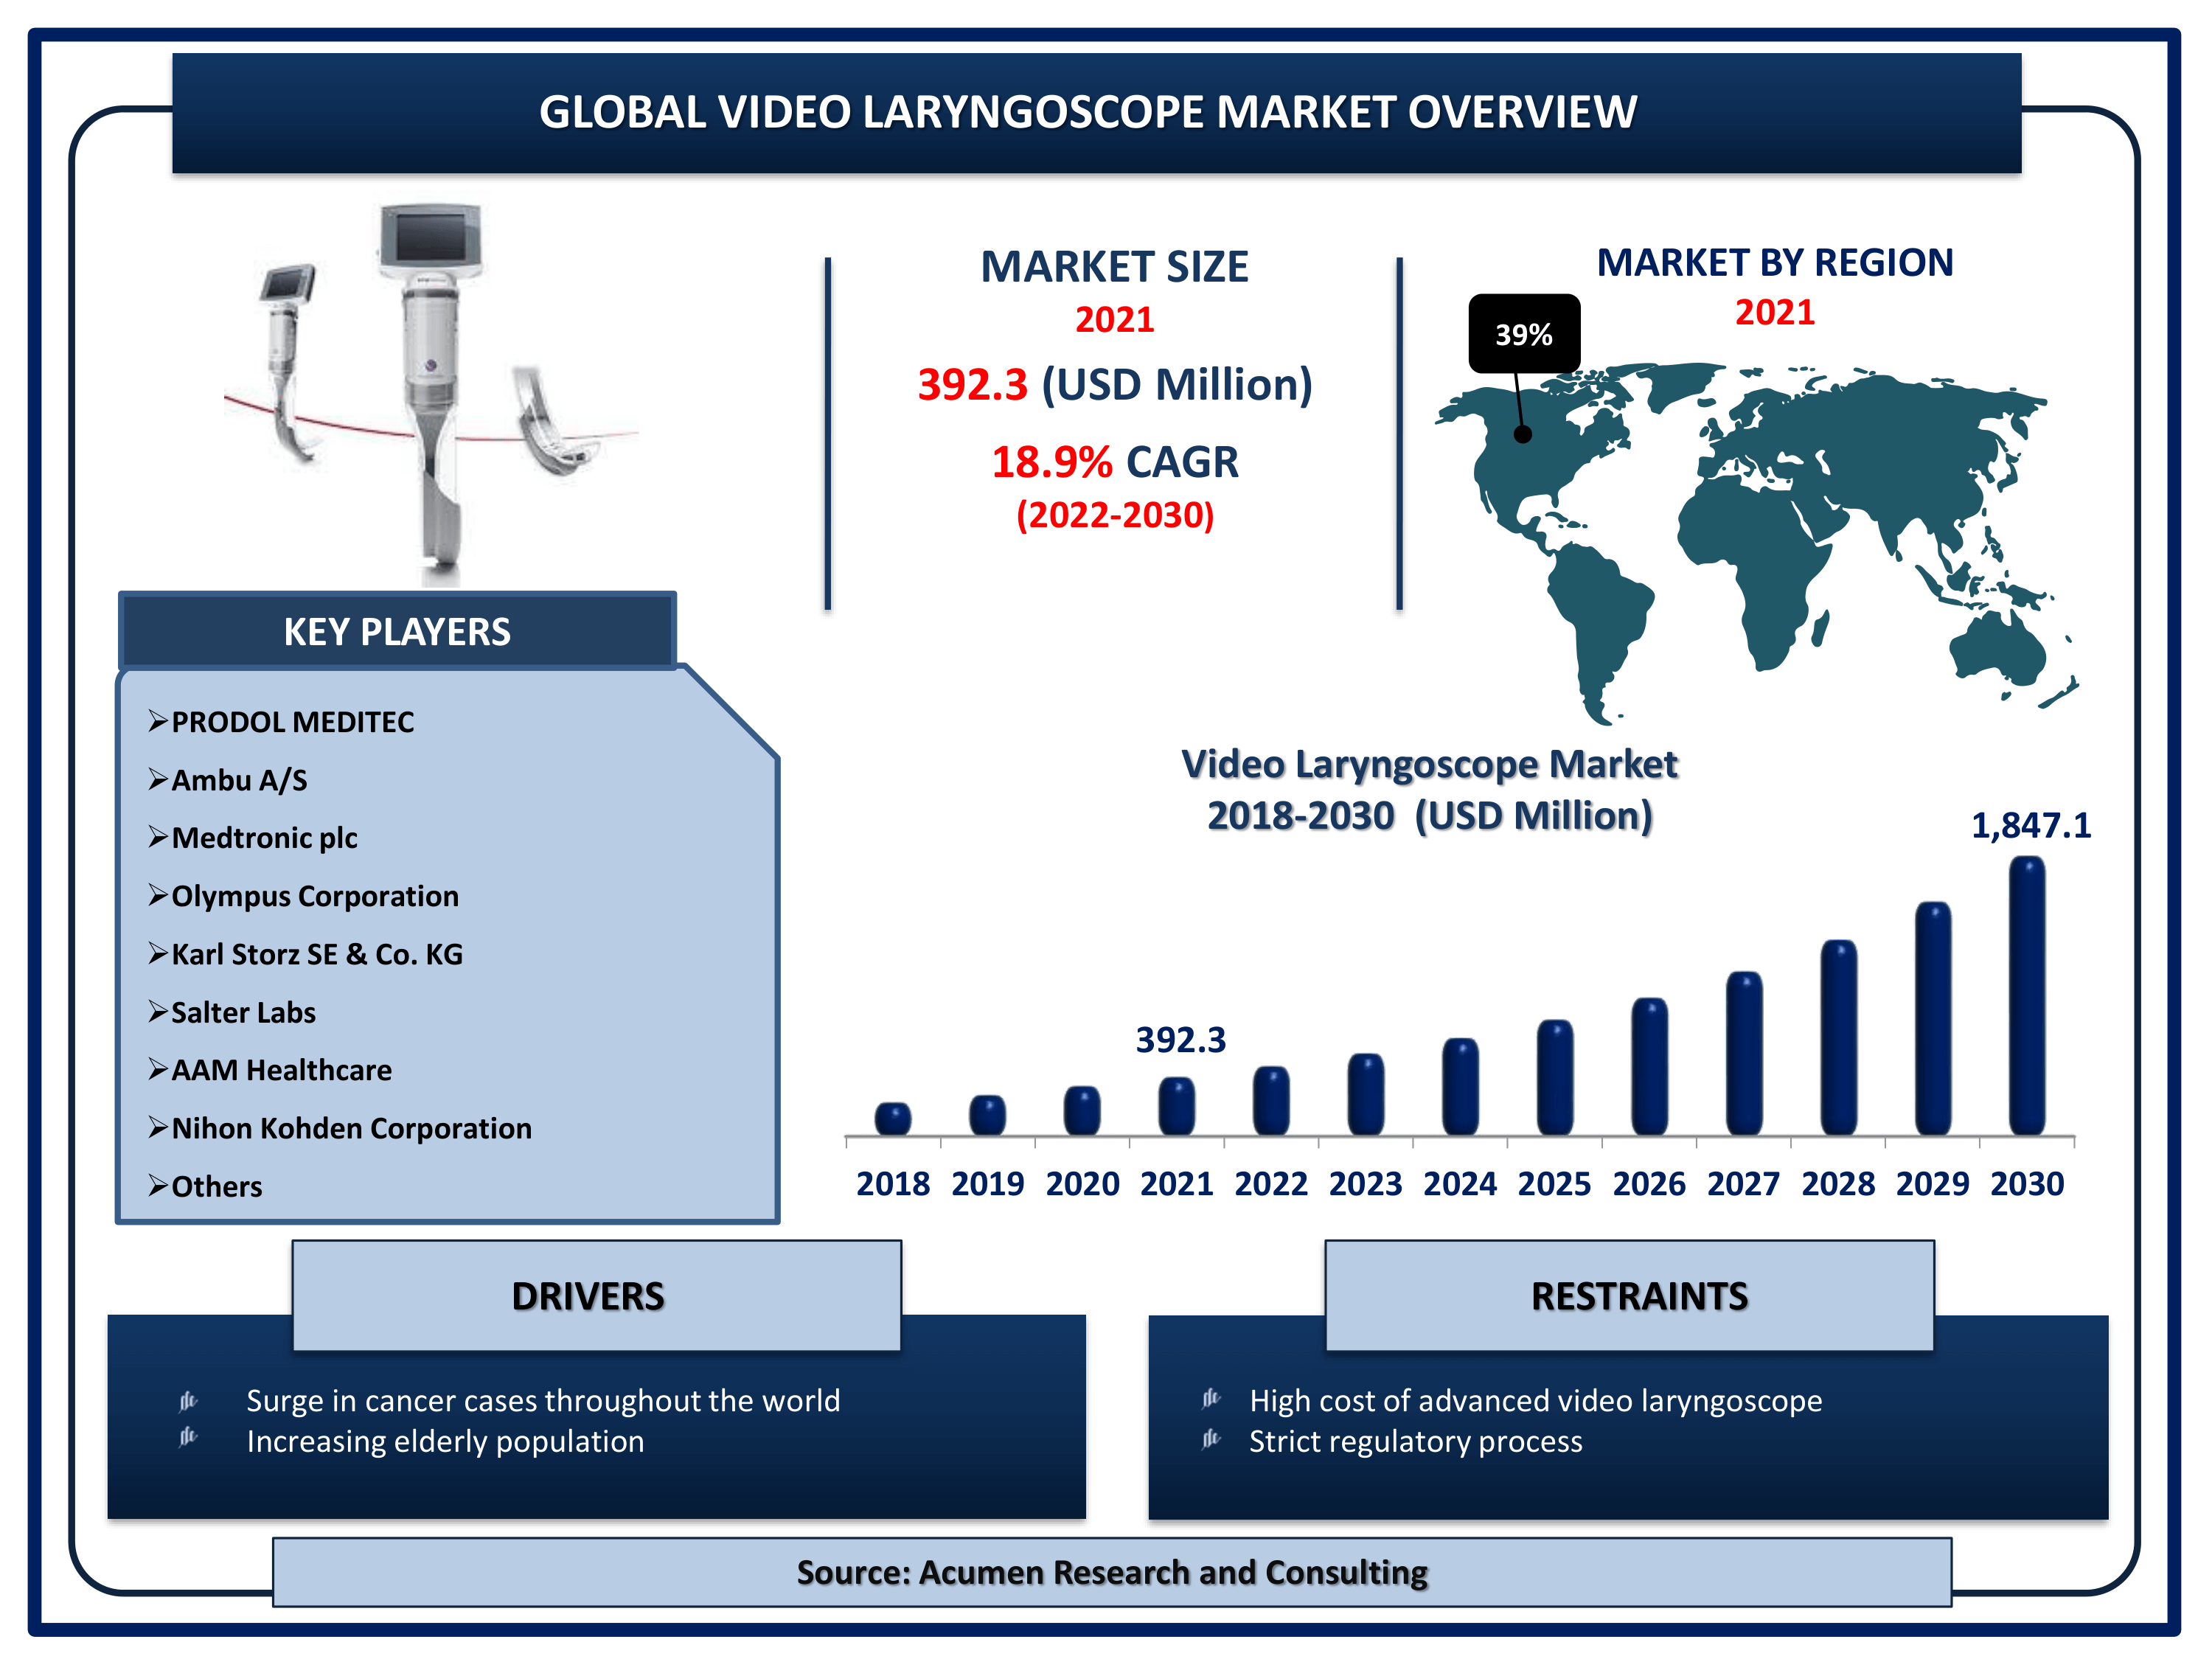 Global video laryngoscope market revenue is estimated to reach USD 1,847.1 Million by 2030 with a CAGR of 18.9% from 2022 to 2030